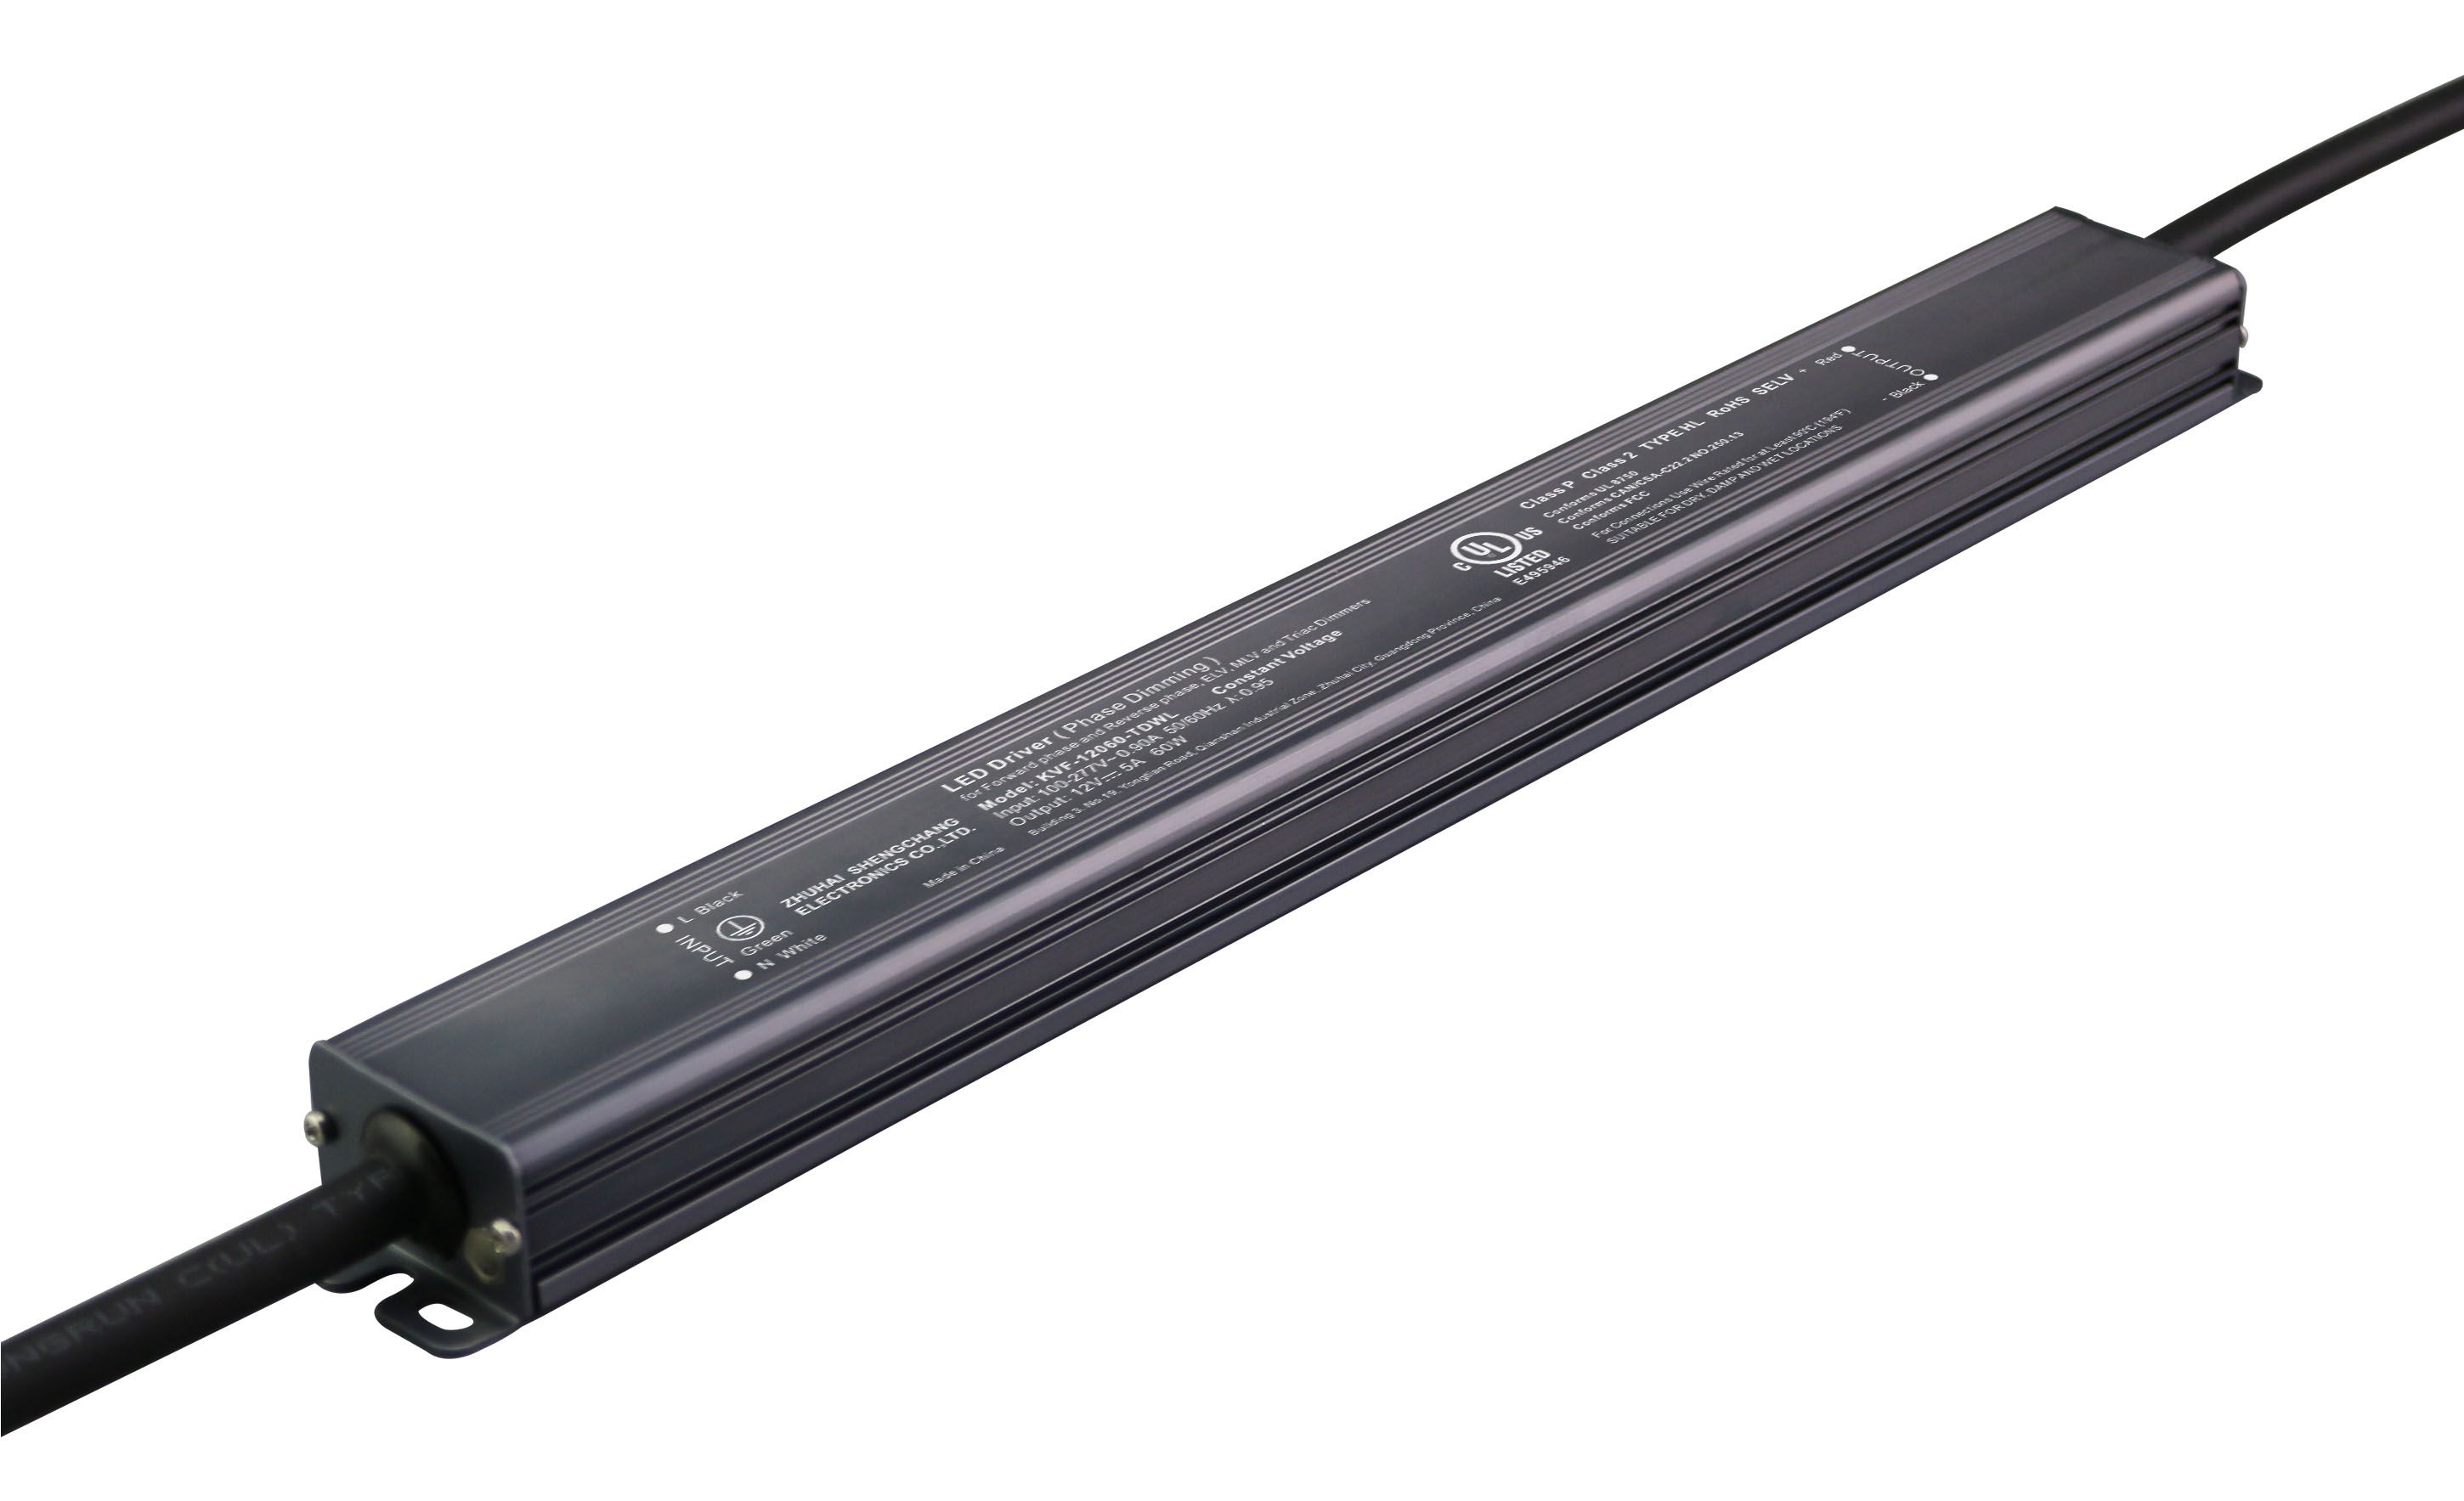 KVF-TDWL Series 60W Constant Voltage Triac Dimmable LED driver